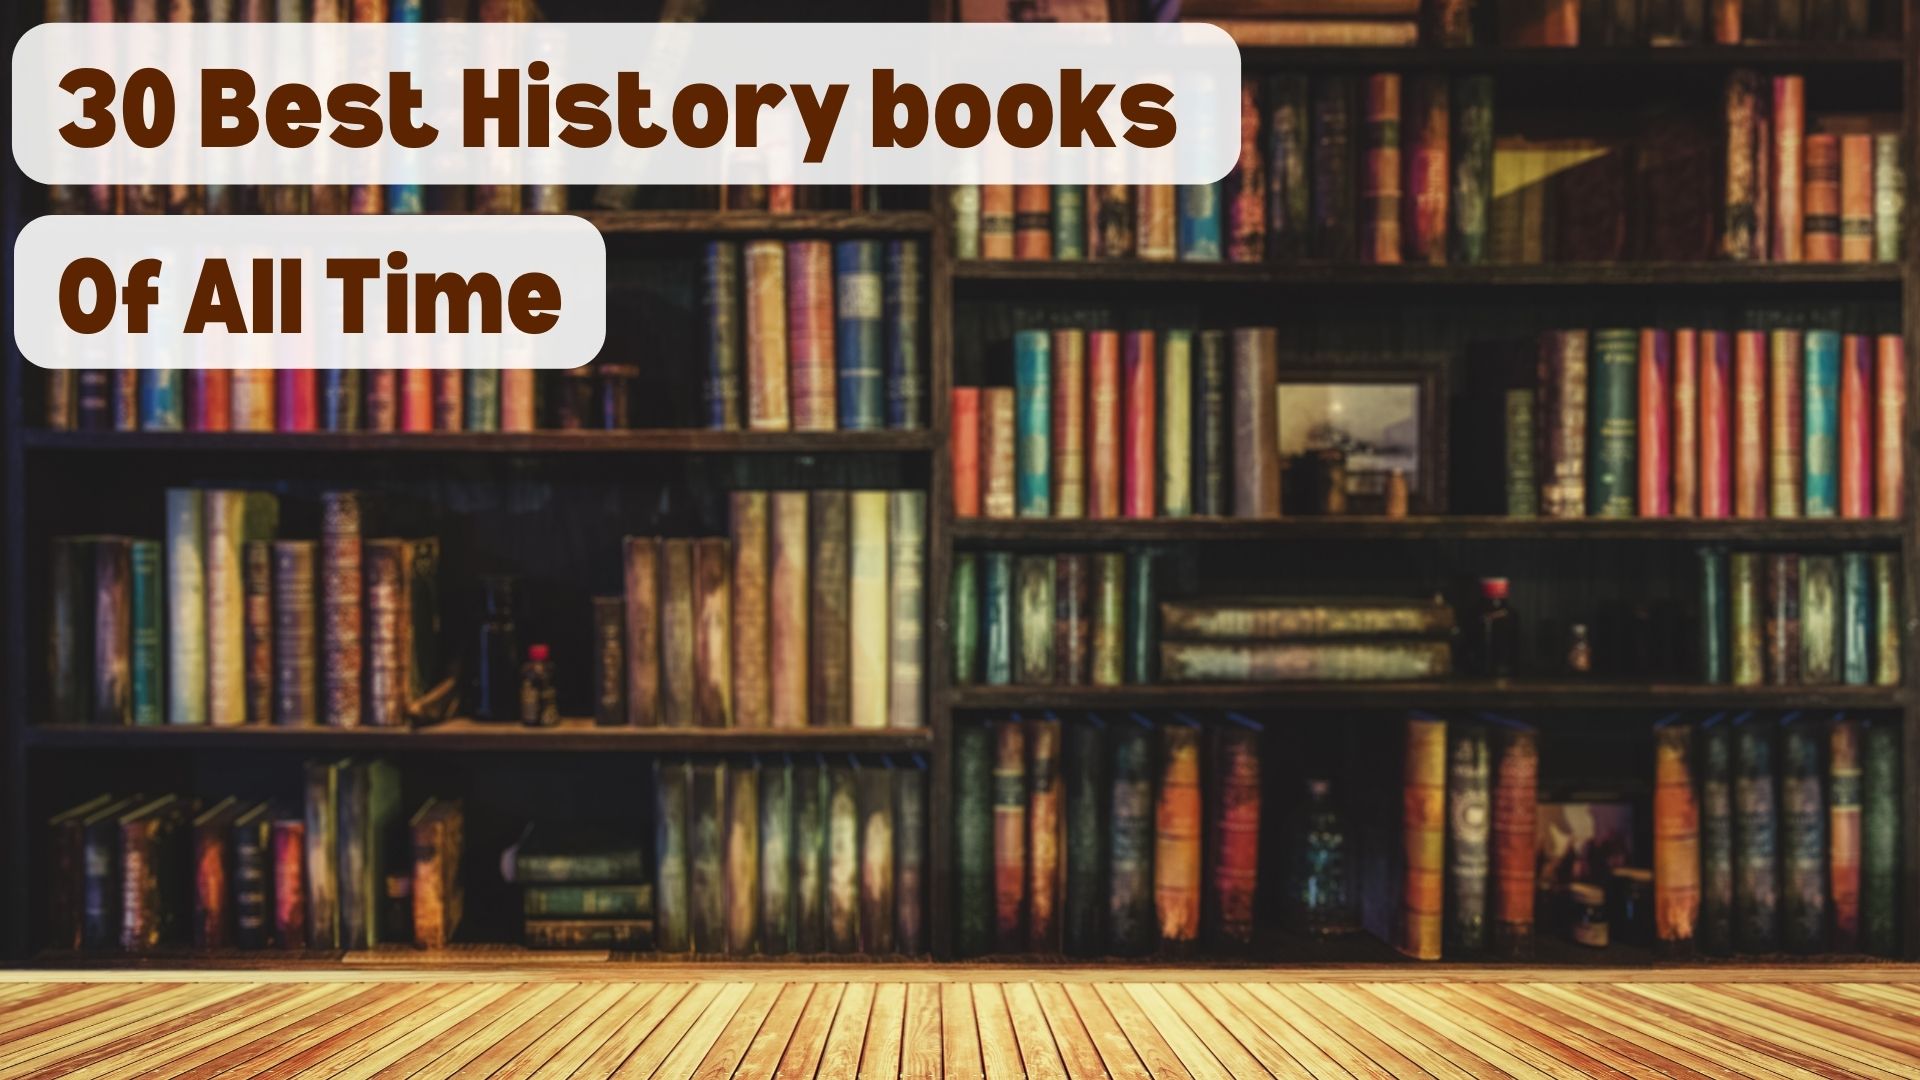 30 Best History books of all time